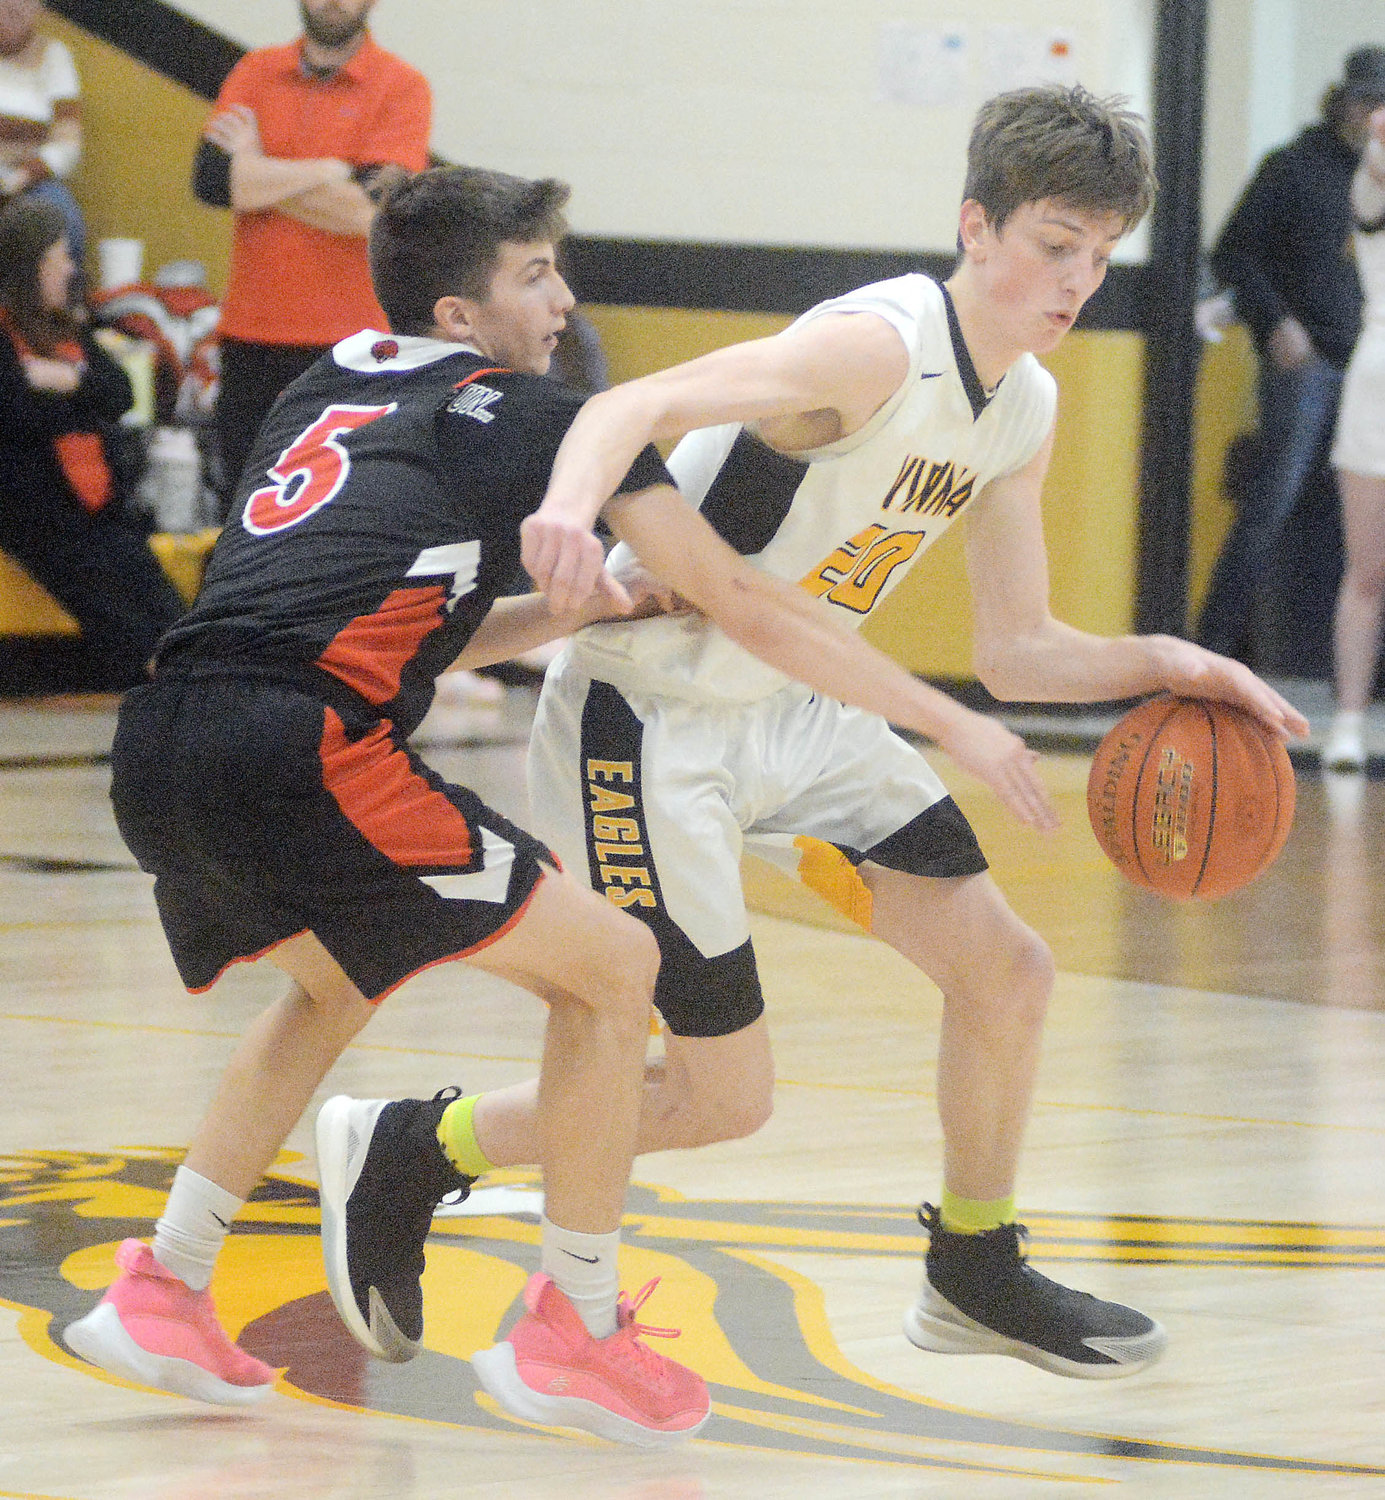 Cash Stricklan (far right) keeps the basketball away from Belle’s Brayden Cadwallader during the annual Battle of Maries County hoops showdown at Vienna High School.